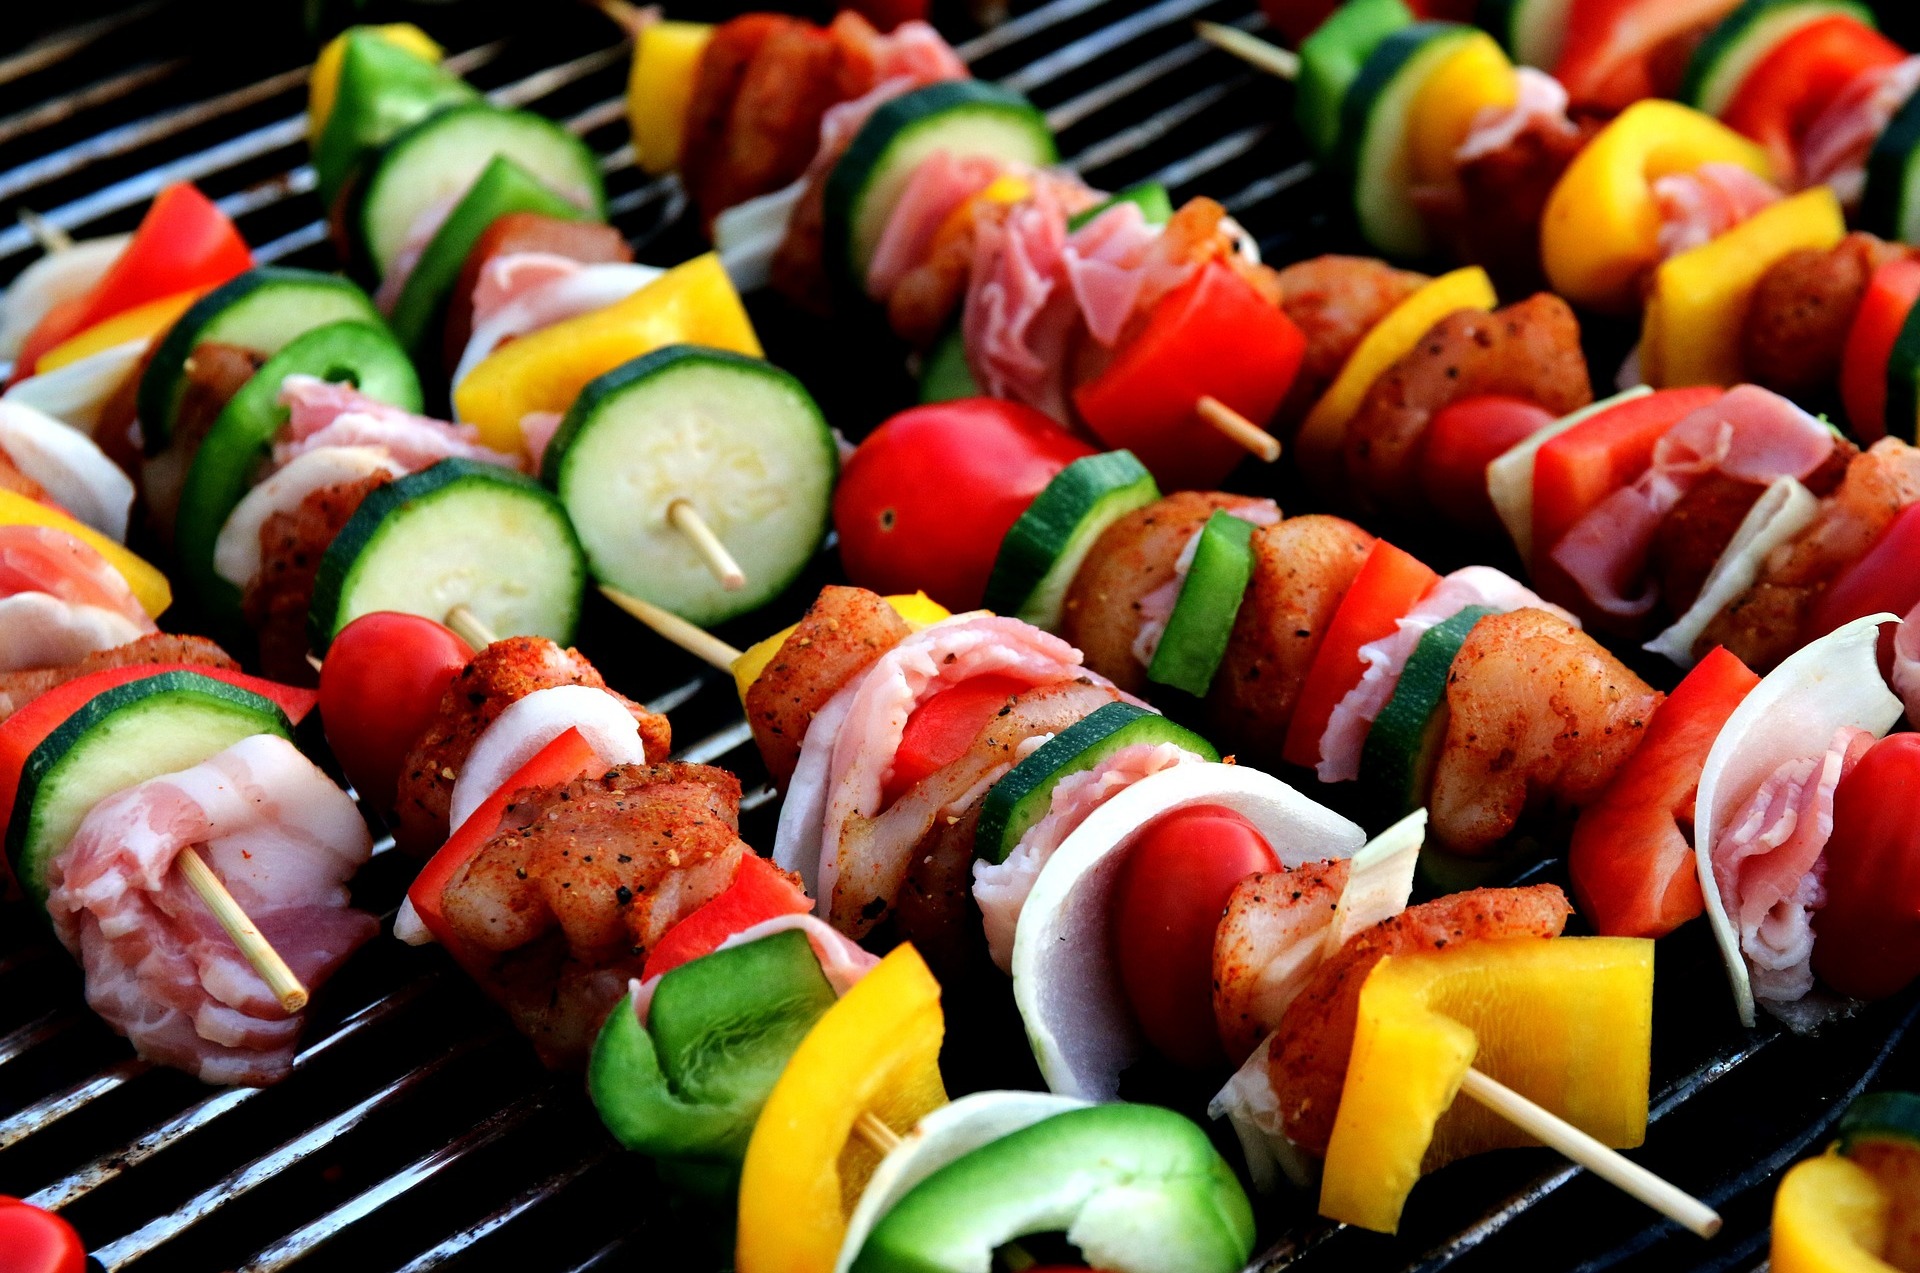 A row of colourful kebabs, with chicken, bacon, courgette, and an assortment of peppers  Click the picture, or the link below, to go to our personal injury solicitors’ no win no fee food contamination claims page.